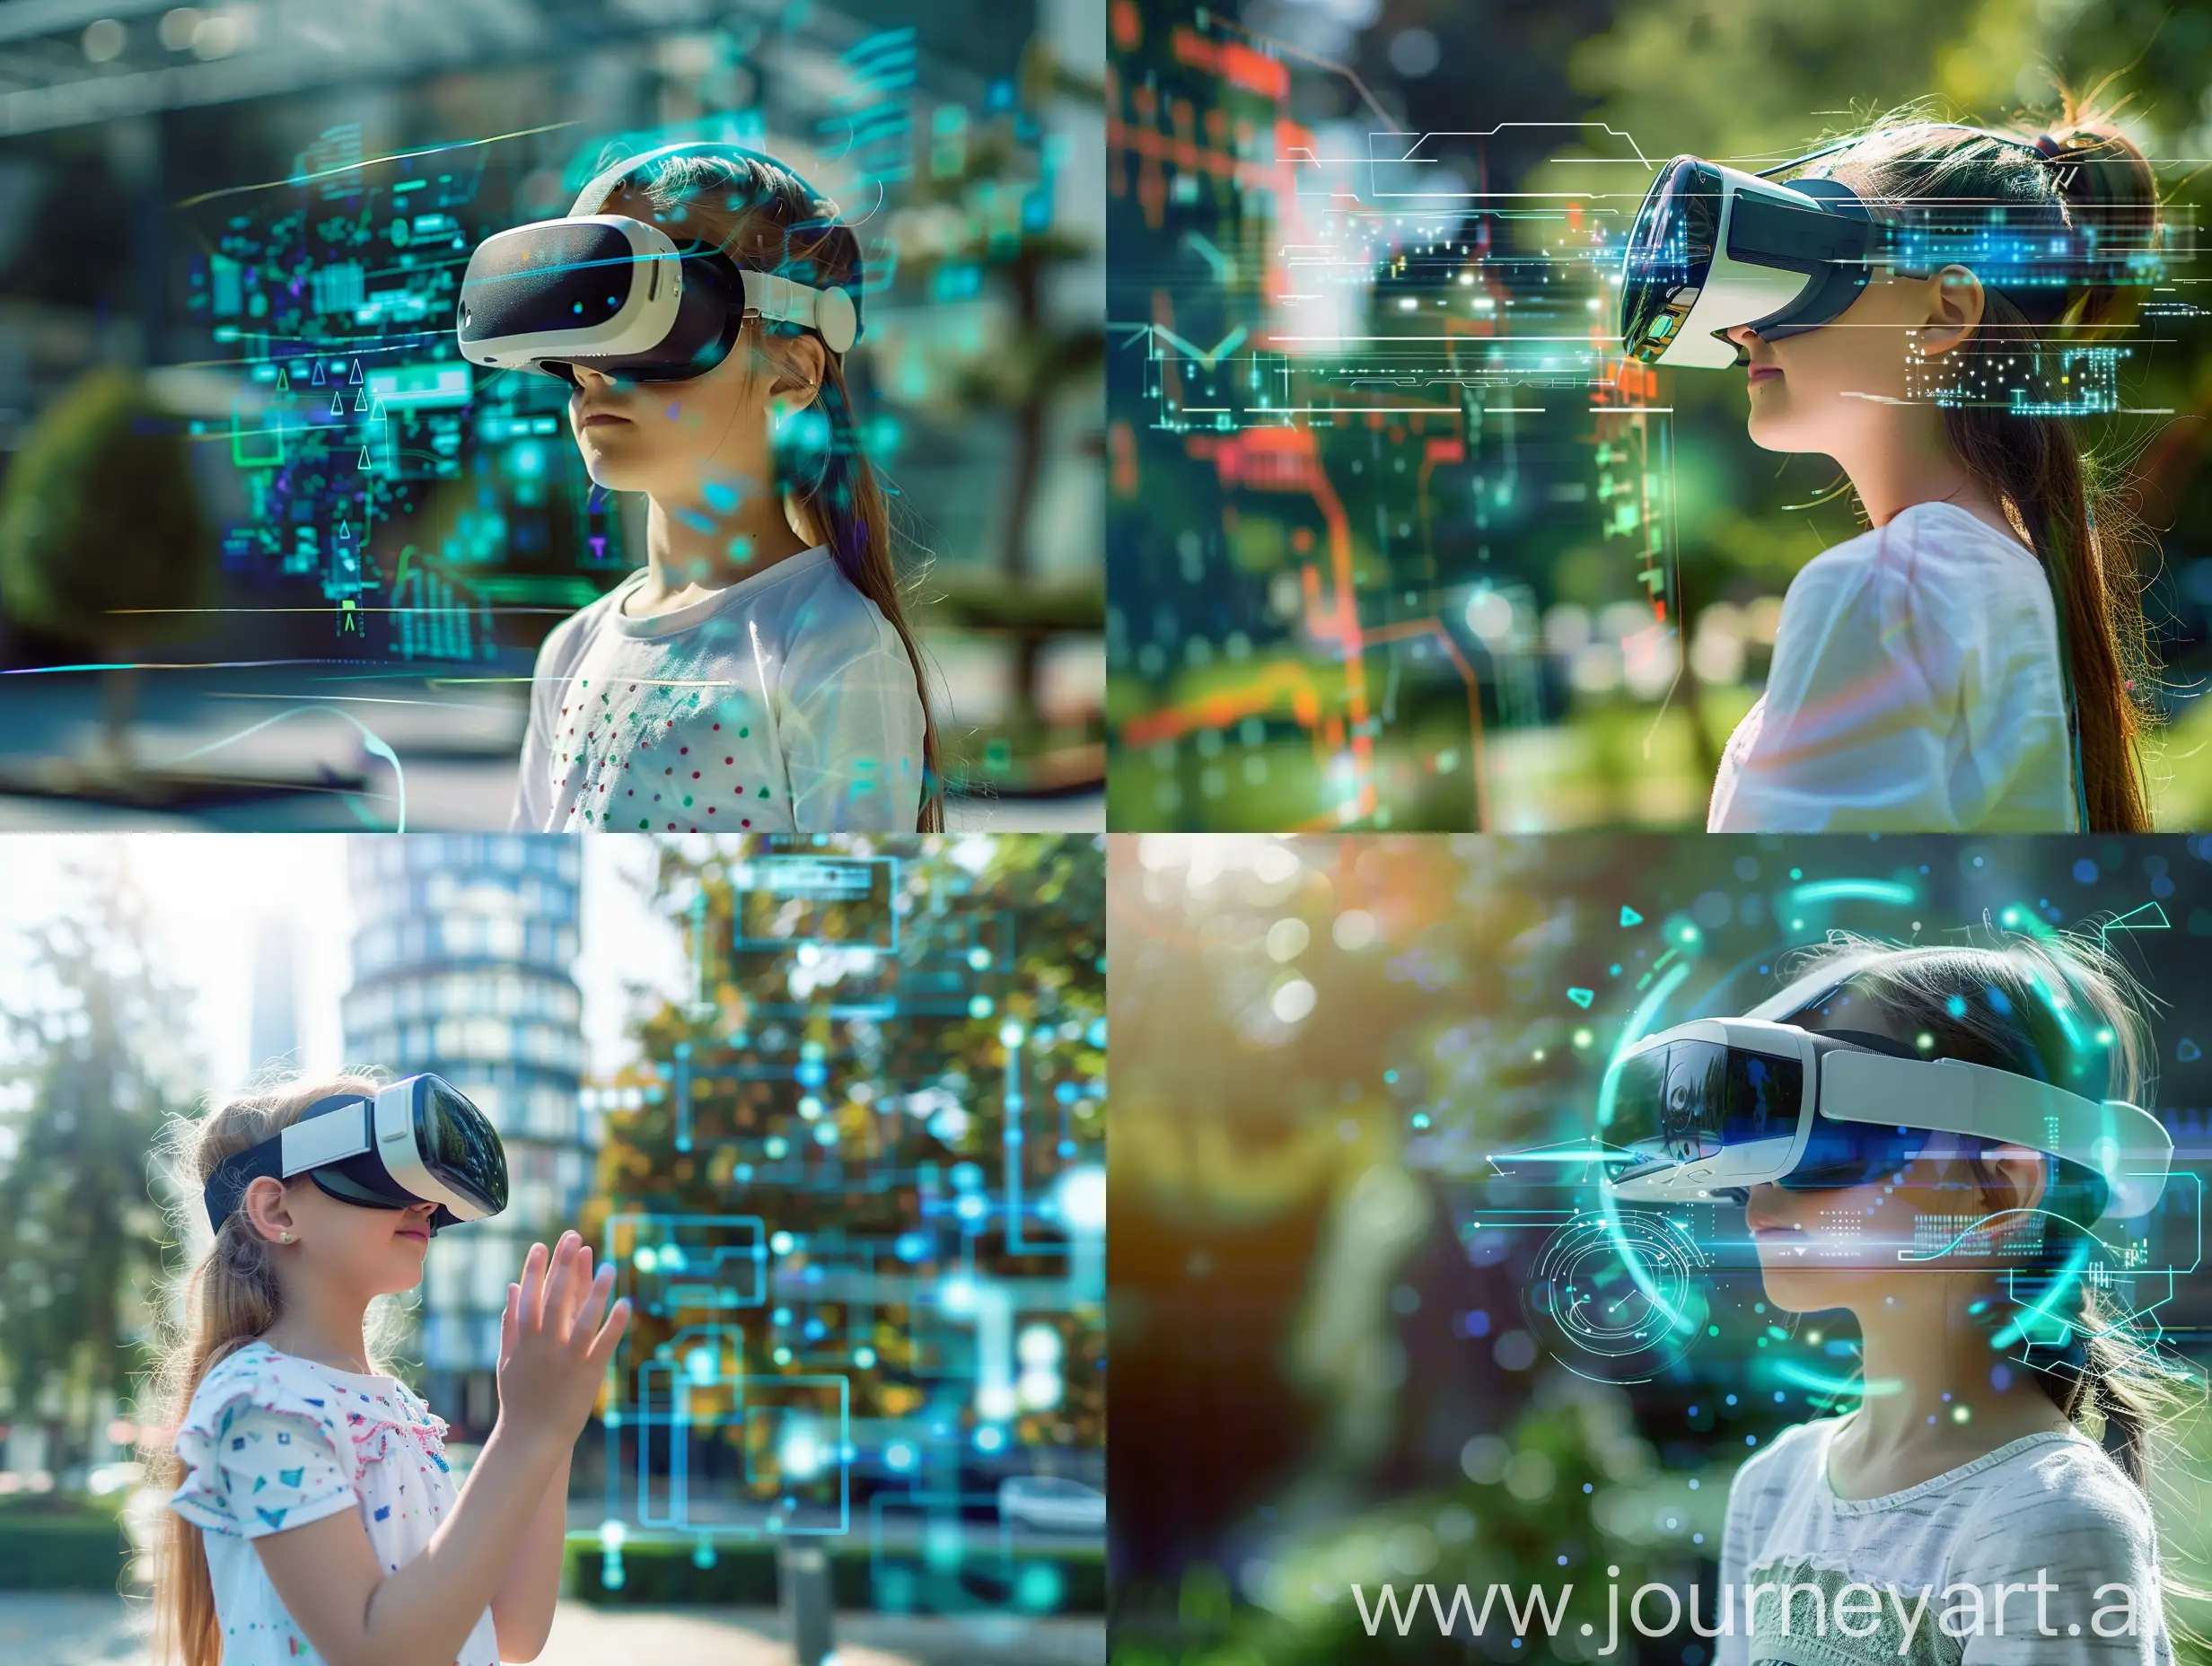 Generate an imaginative image depicting the intersection of education and new technology, where a young girl engages with virtual reality (VR) technology outdoors. Show her immersed in a virtual world, wearing a VR headset, with futuristic processors and augmented reality (AR) elements visible in the background. Capture the essence of cutting-edge technology and its potential to revolutionize learning experiences, emphasizing the fusion of high technology and education.